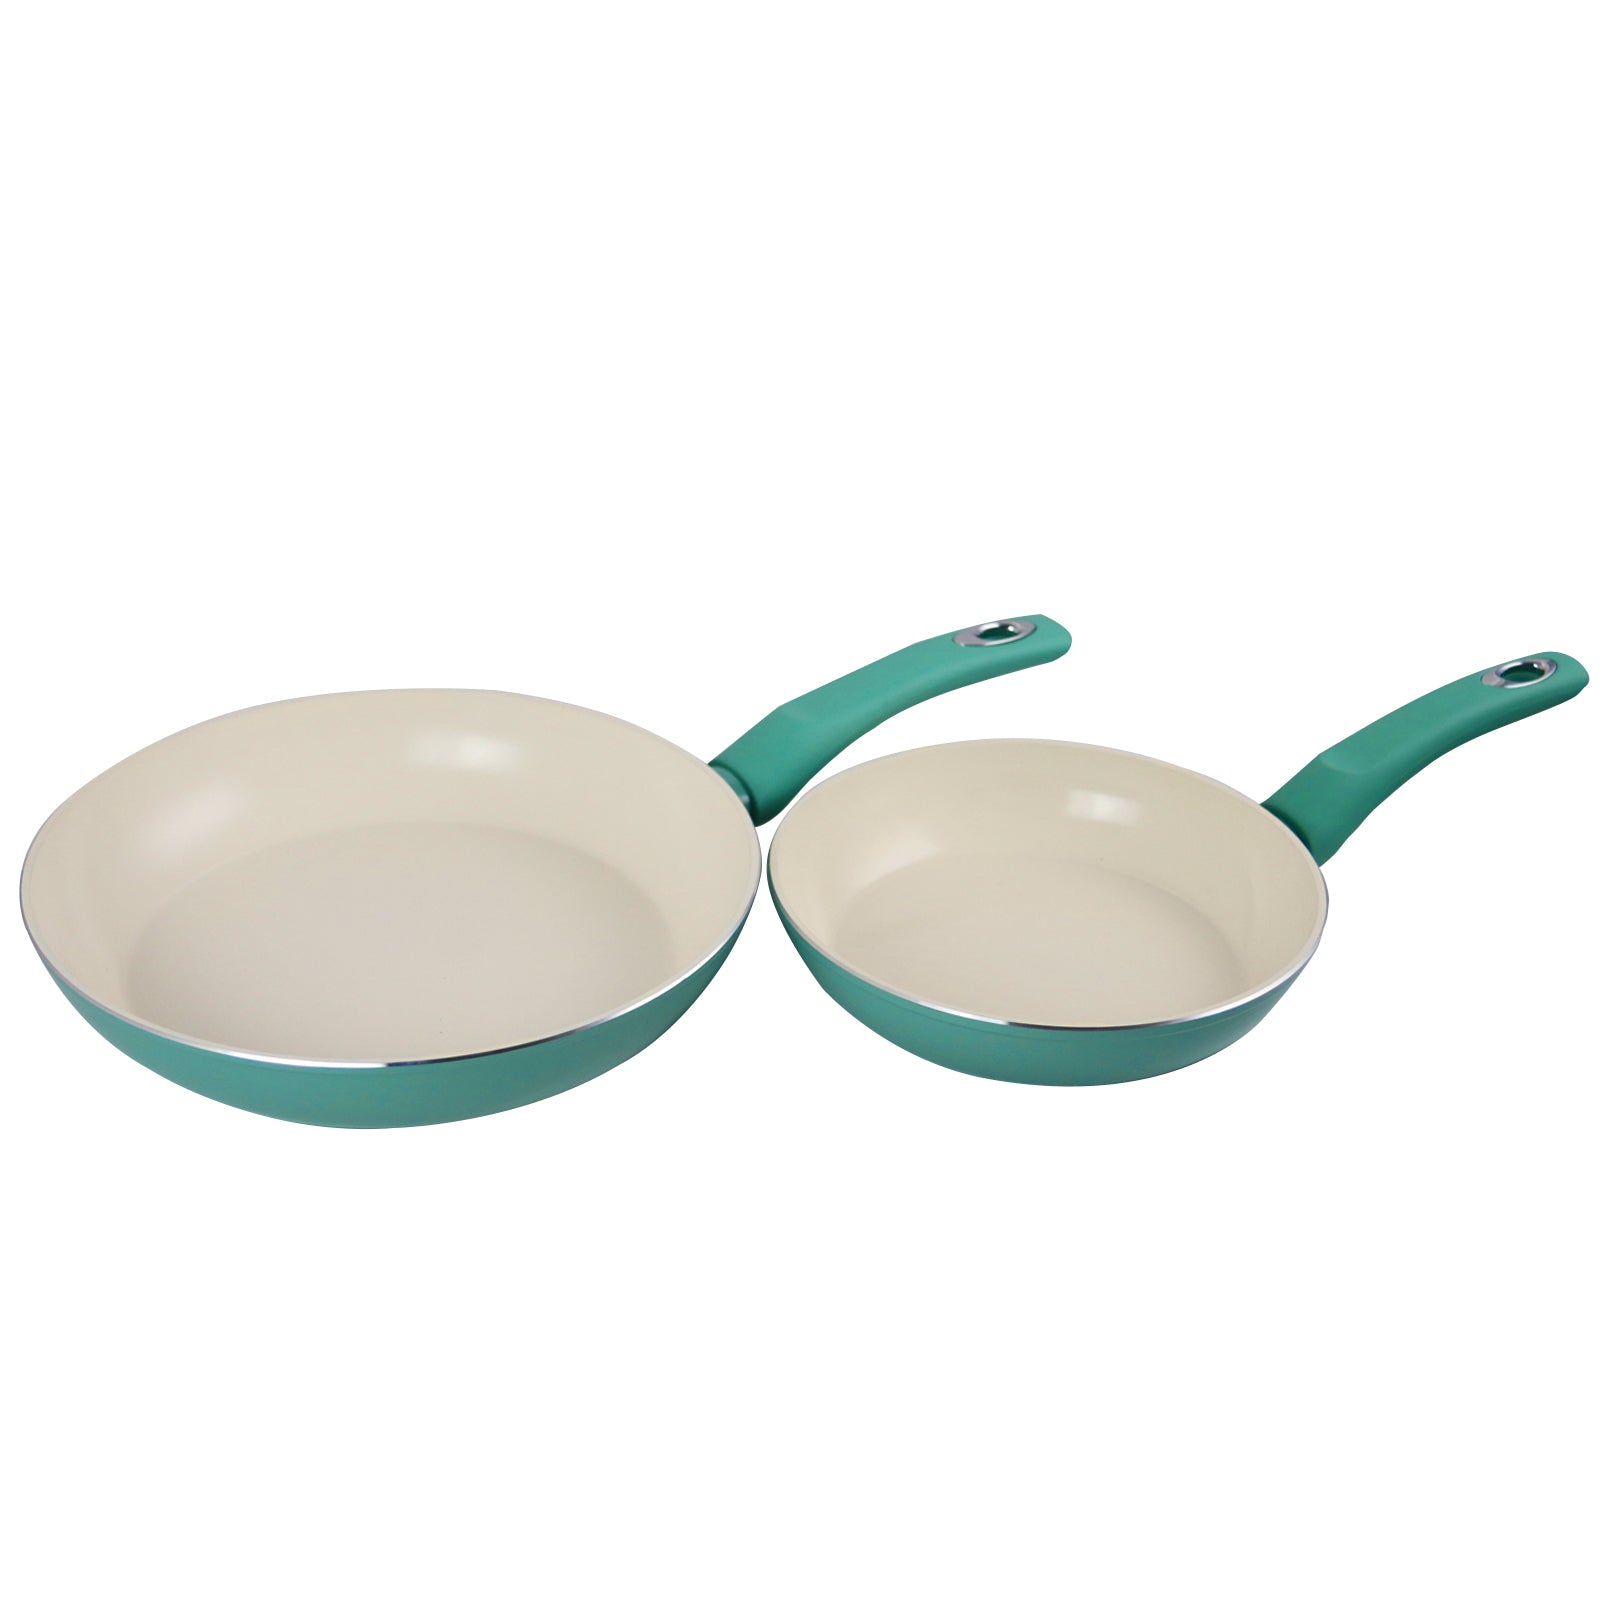 GIBSON HOME PLAZA CAFE 2 PIECE ALUMINUM FRYING PAN SET WITH SOFT